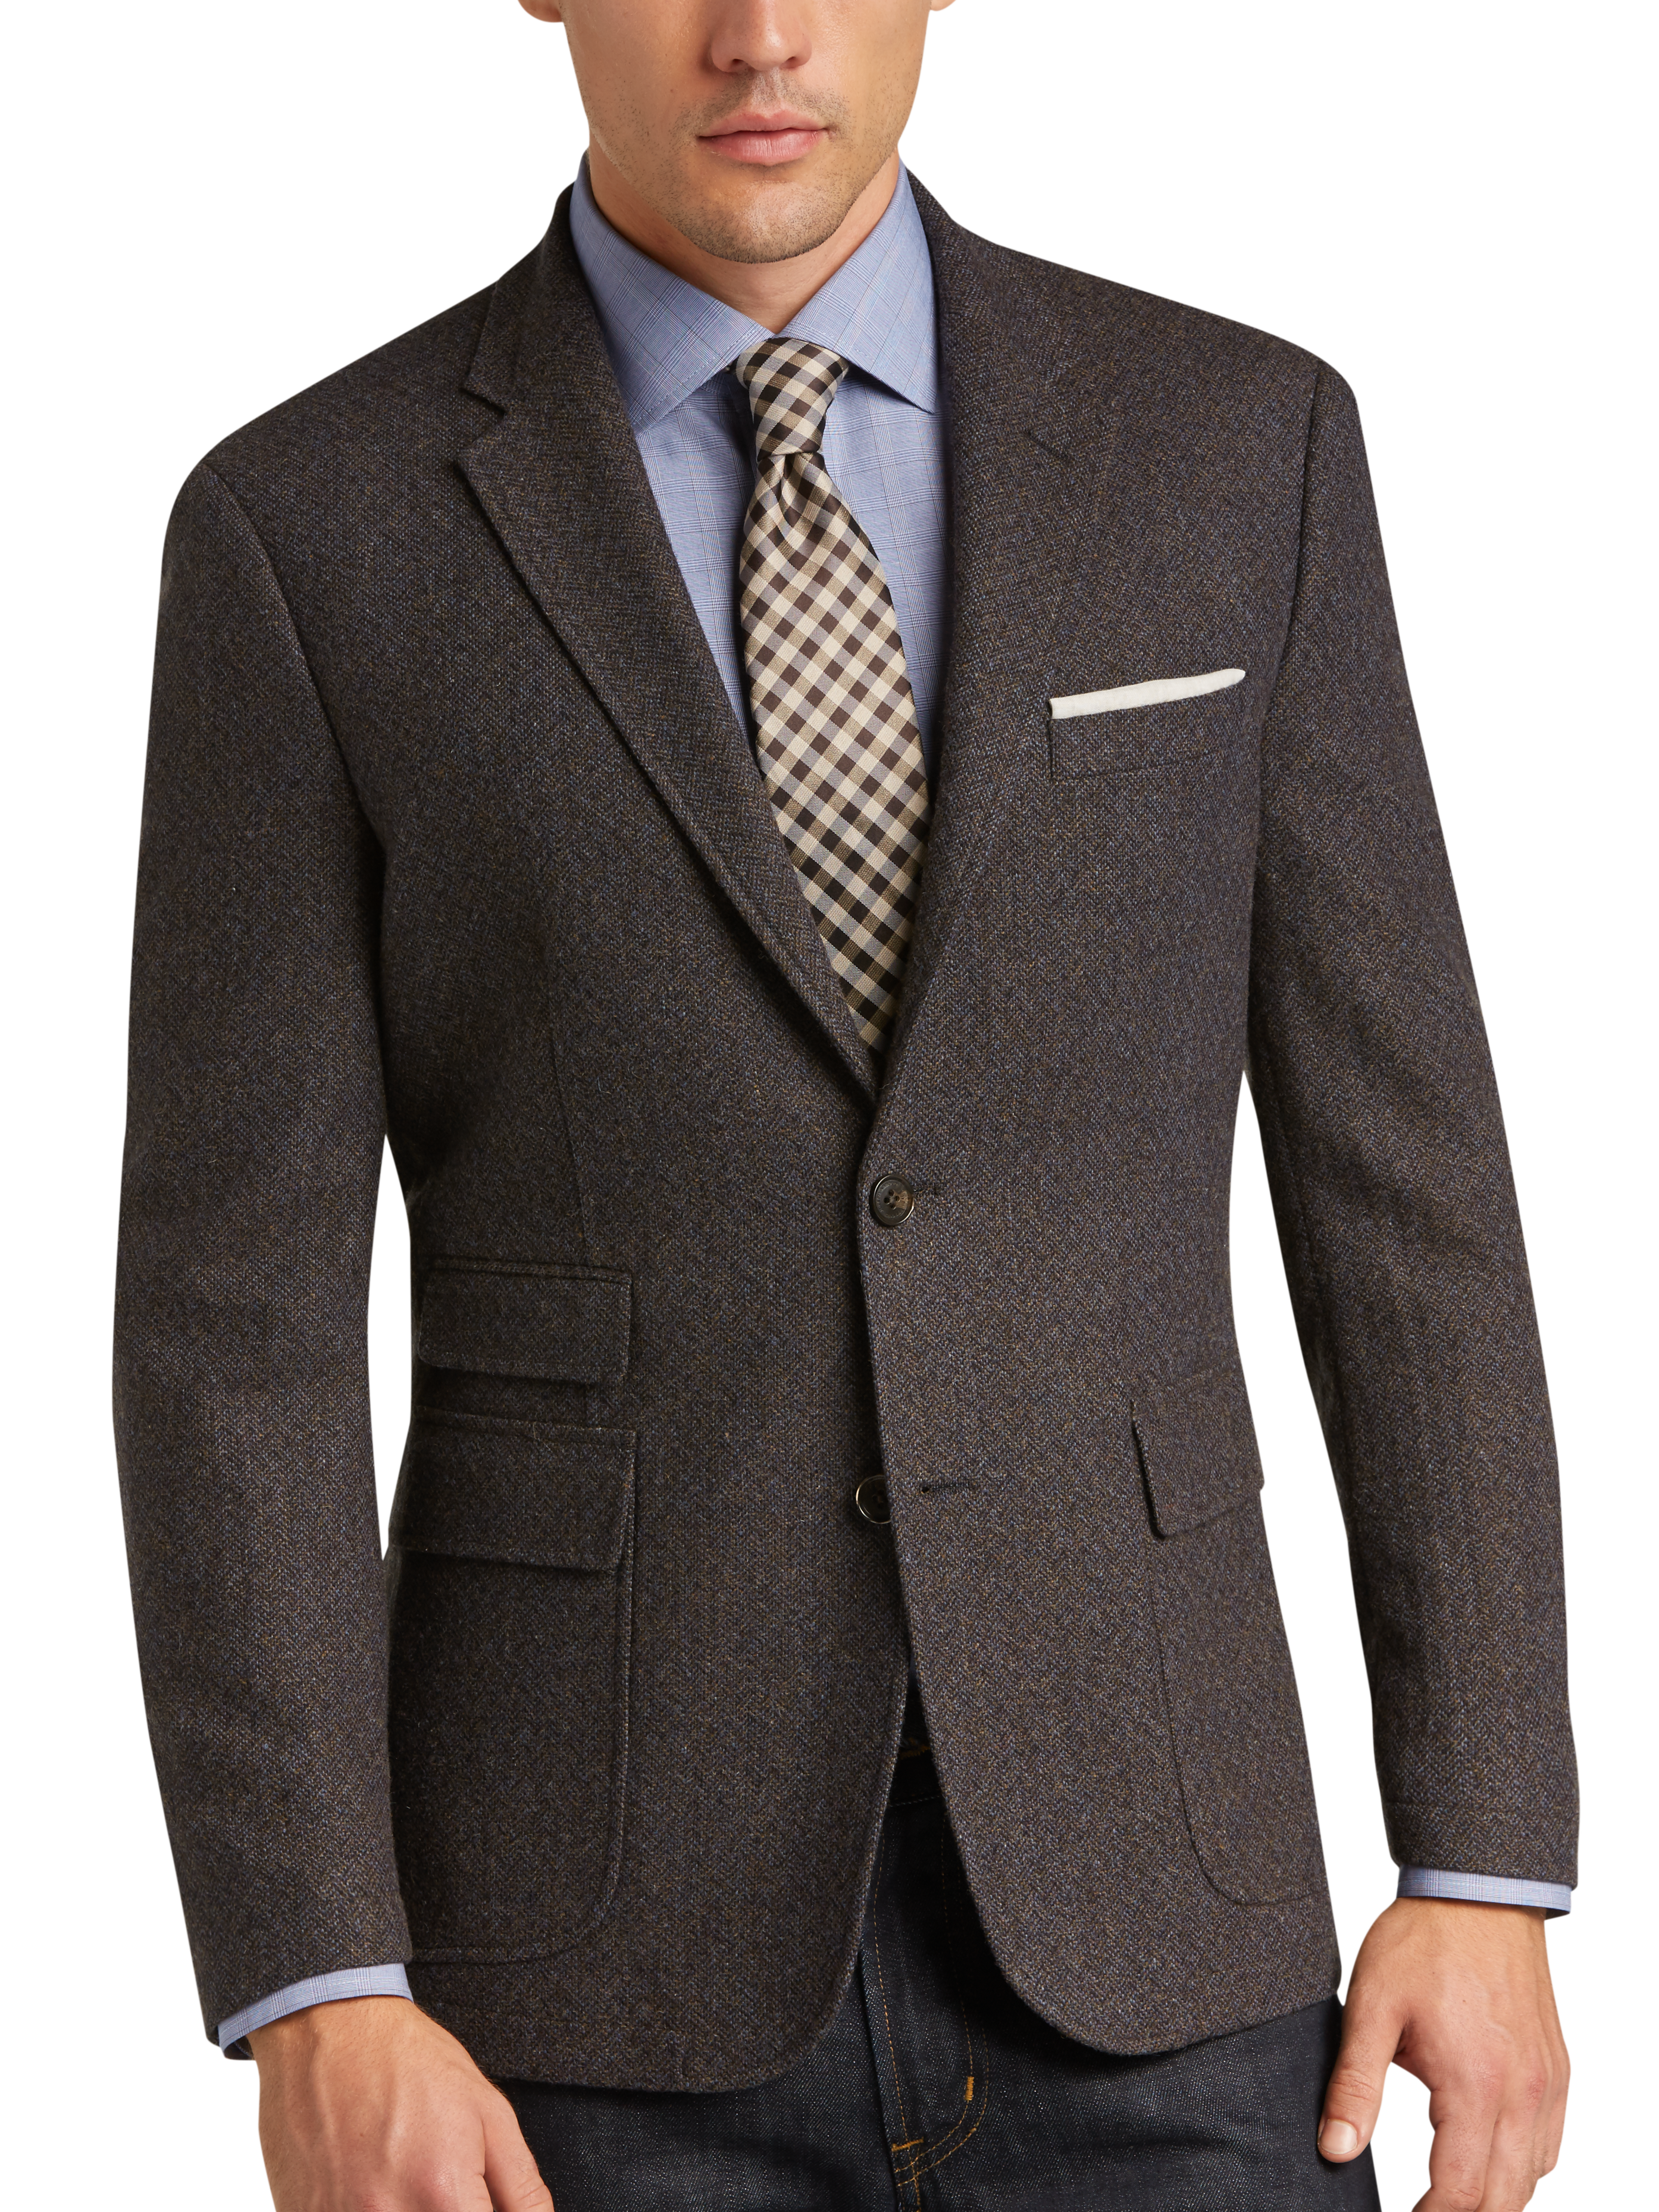 Joseph Abboud Collection, Clothing, Tuxedos, Suits | Men's Wearhouse